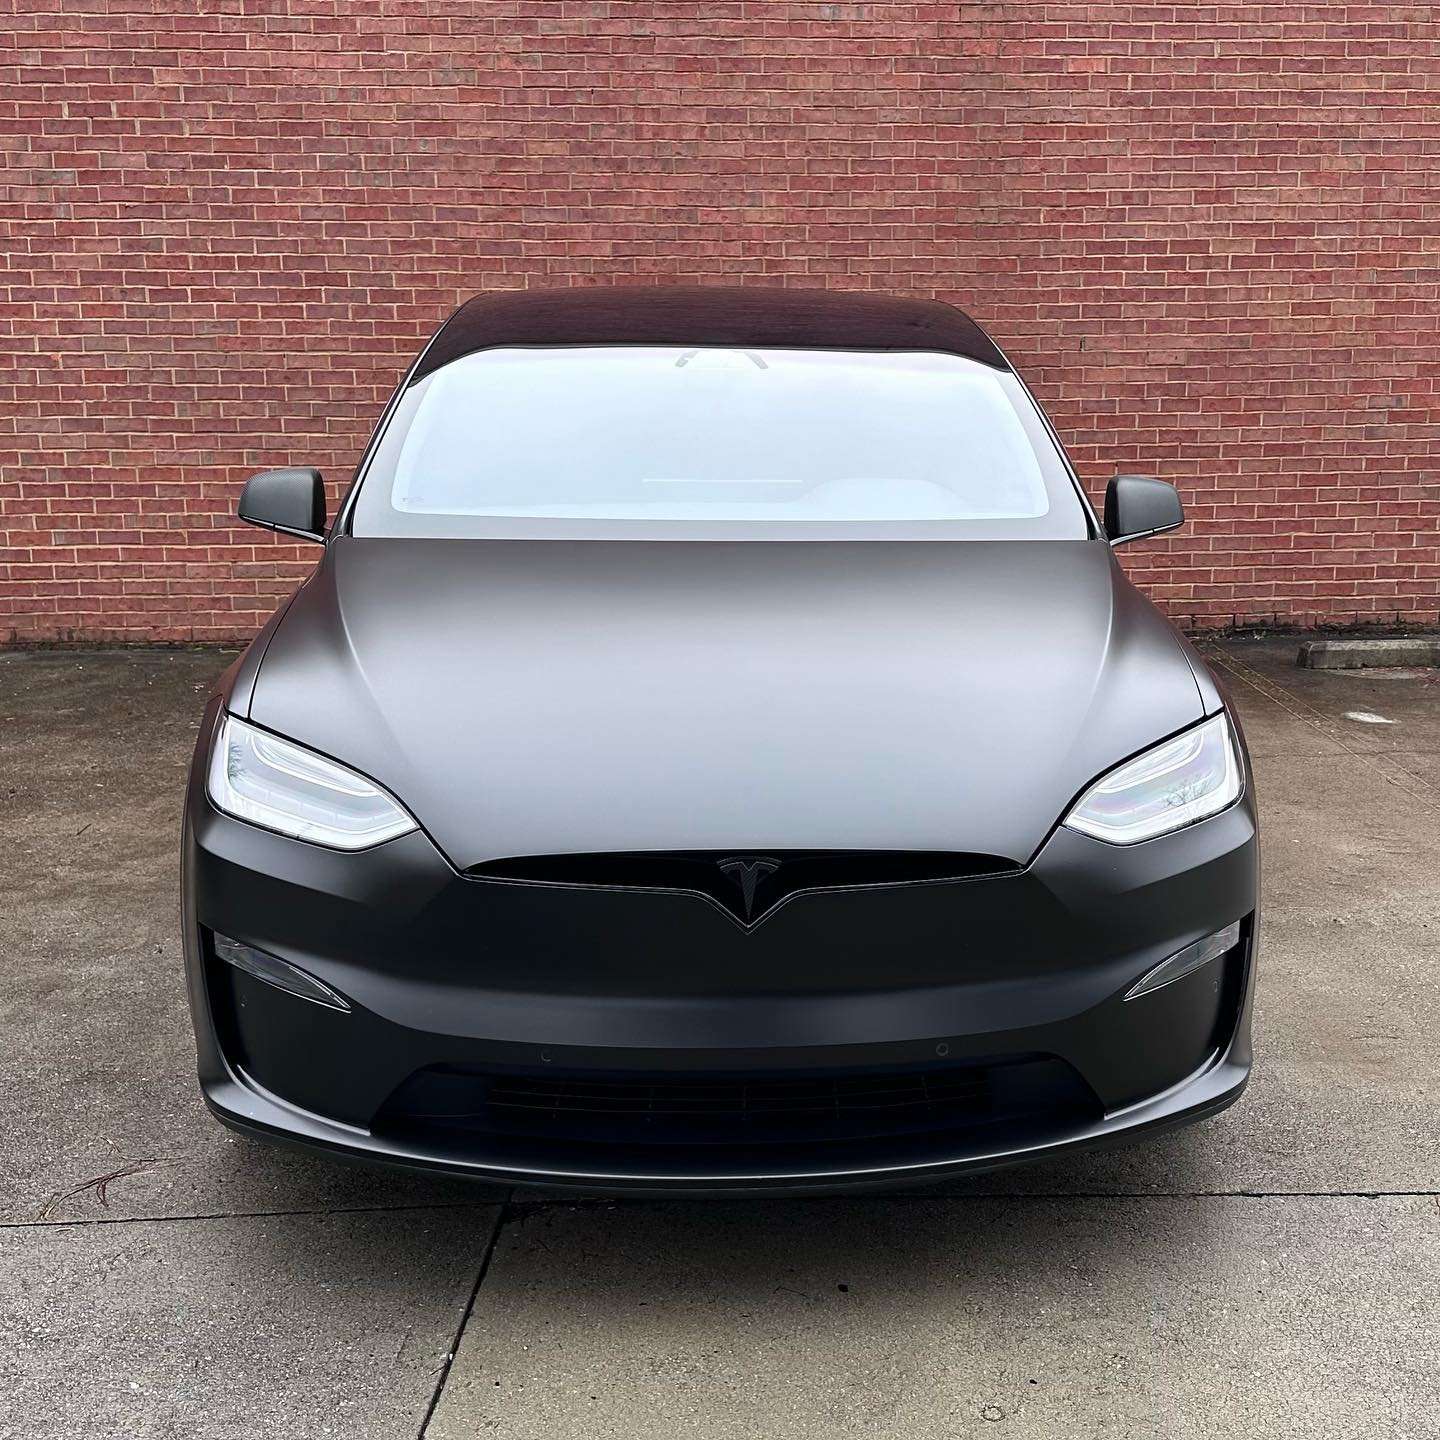 Stealth look achieved with satin ppf over oem paint. Also added carbon fiber accents!
.
.
.
#tesla #teslamodelx #teslamodelxplaid #satinblack #allblack #teslawrap #itsawrap #layednotsprayed #topcarwraps #bodyfenceofficial #ppf #hexisamericas